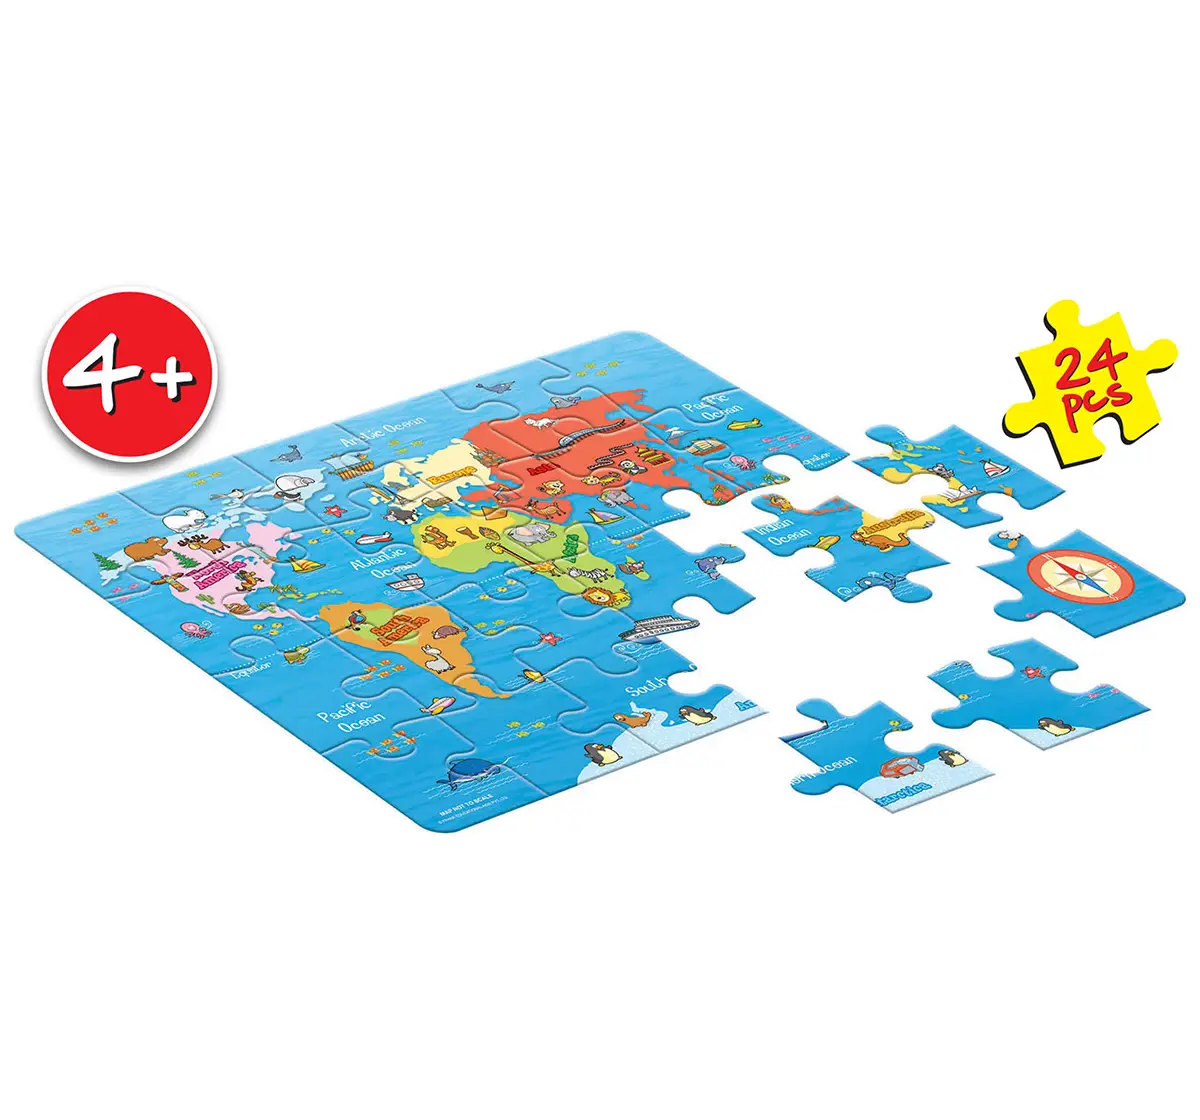 Frank My First World Map Puzzles for Kids age 4Y+ 